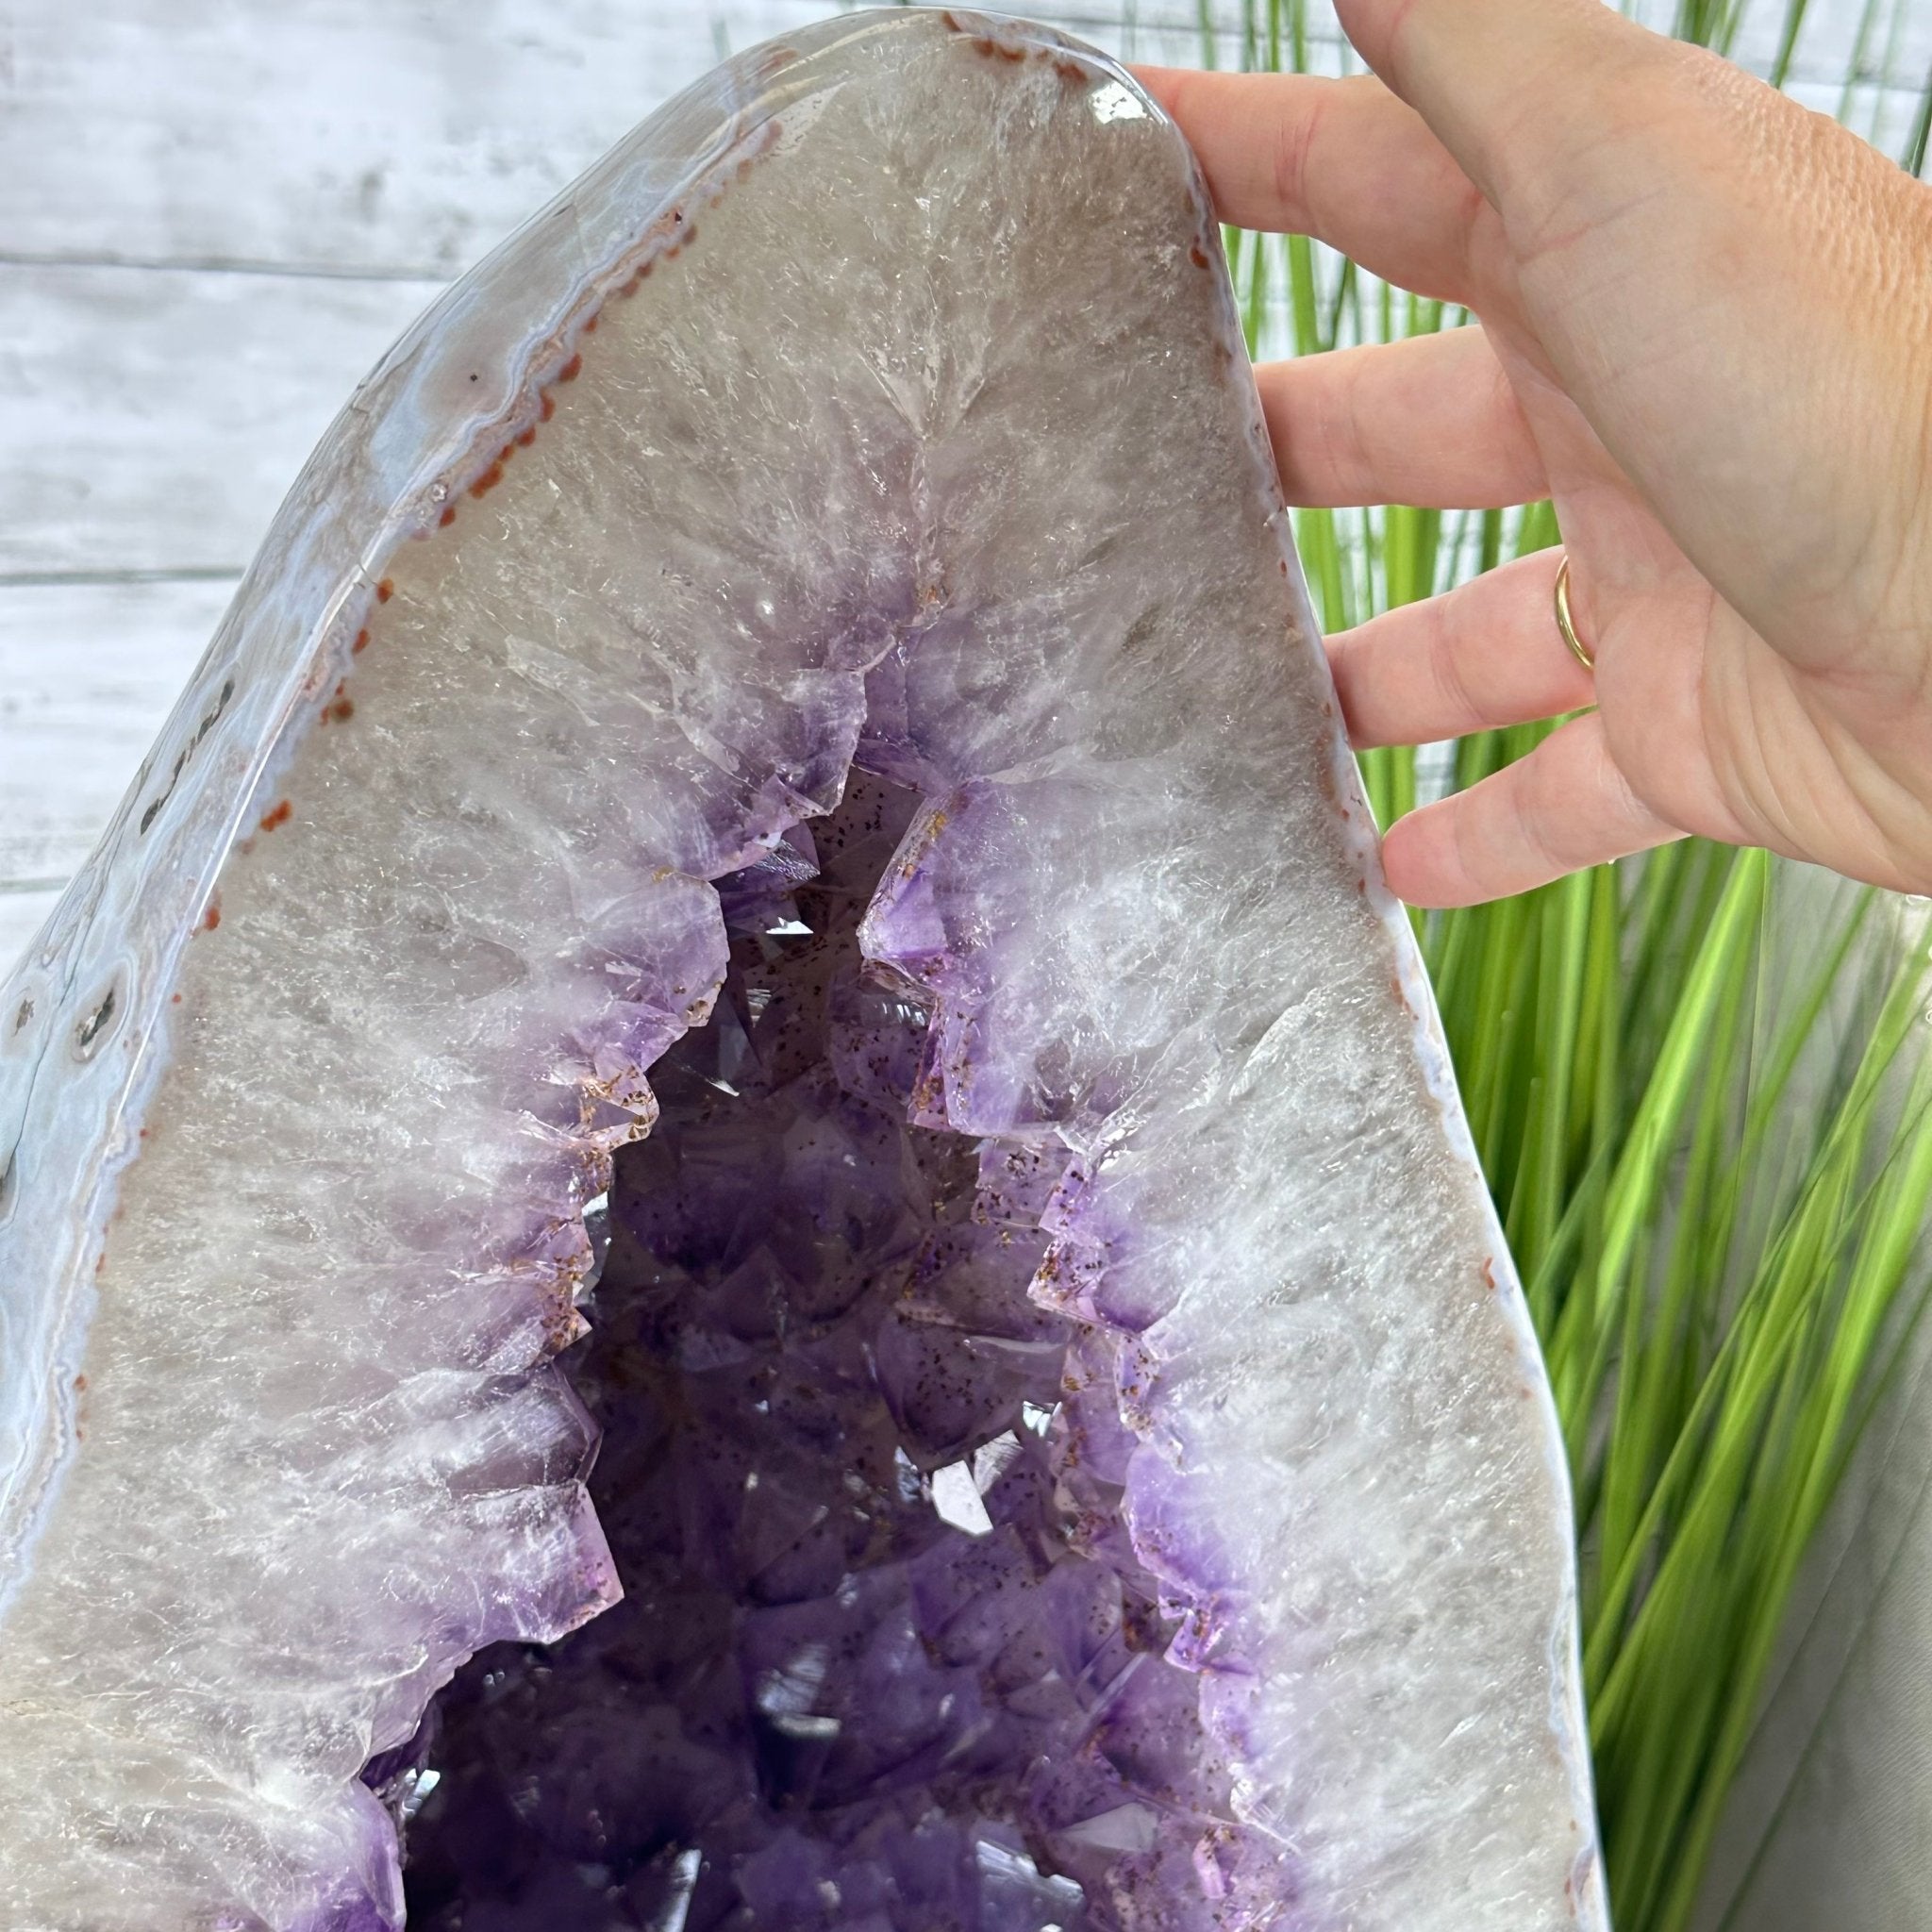 Extra Plus Quality Polished Brazilian Amethyst Cathedral, 116.9 lbs & 20.6" tall Model #5602-0011 by Brazil Gems - Brazil GemsBrazil GemsExtra Plus Quality Polished Brazilian Amethyst Cathedral, 116.9 lbs & 20.6" tall Model #5602-0011 by Brazil GemsPolished Cathedrals5602-0011